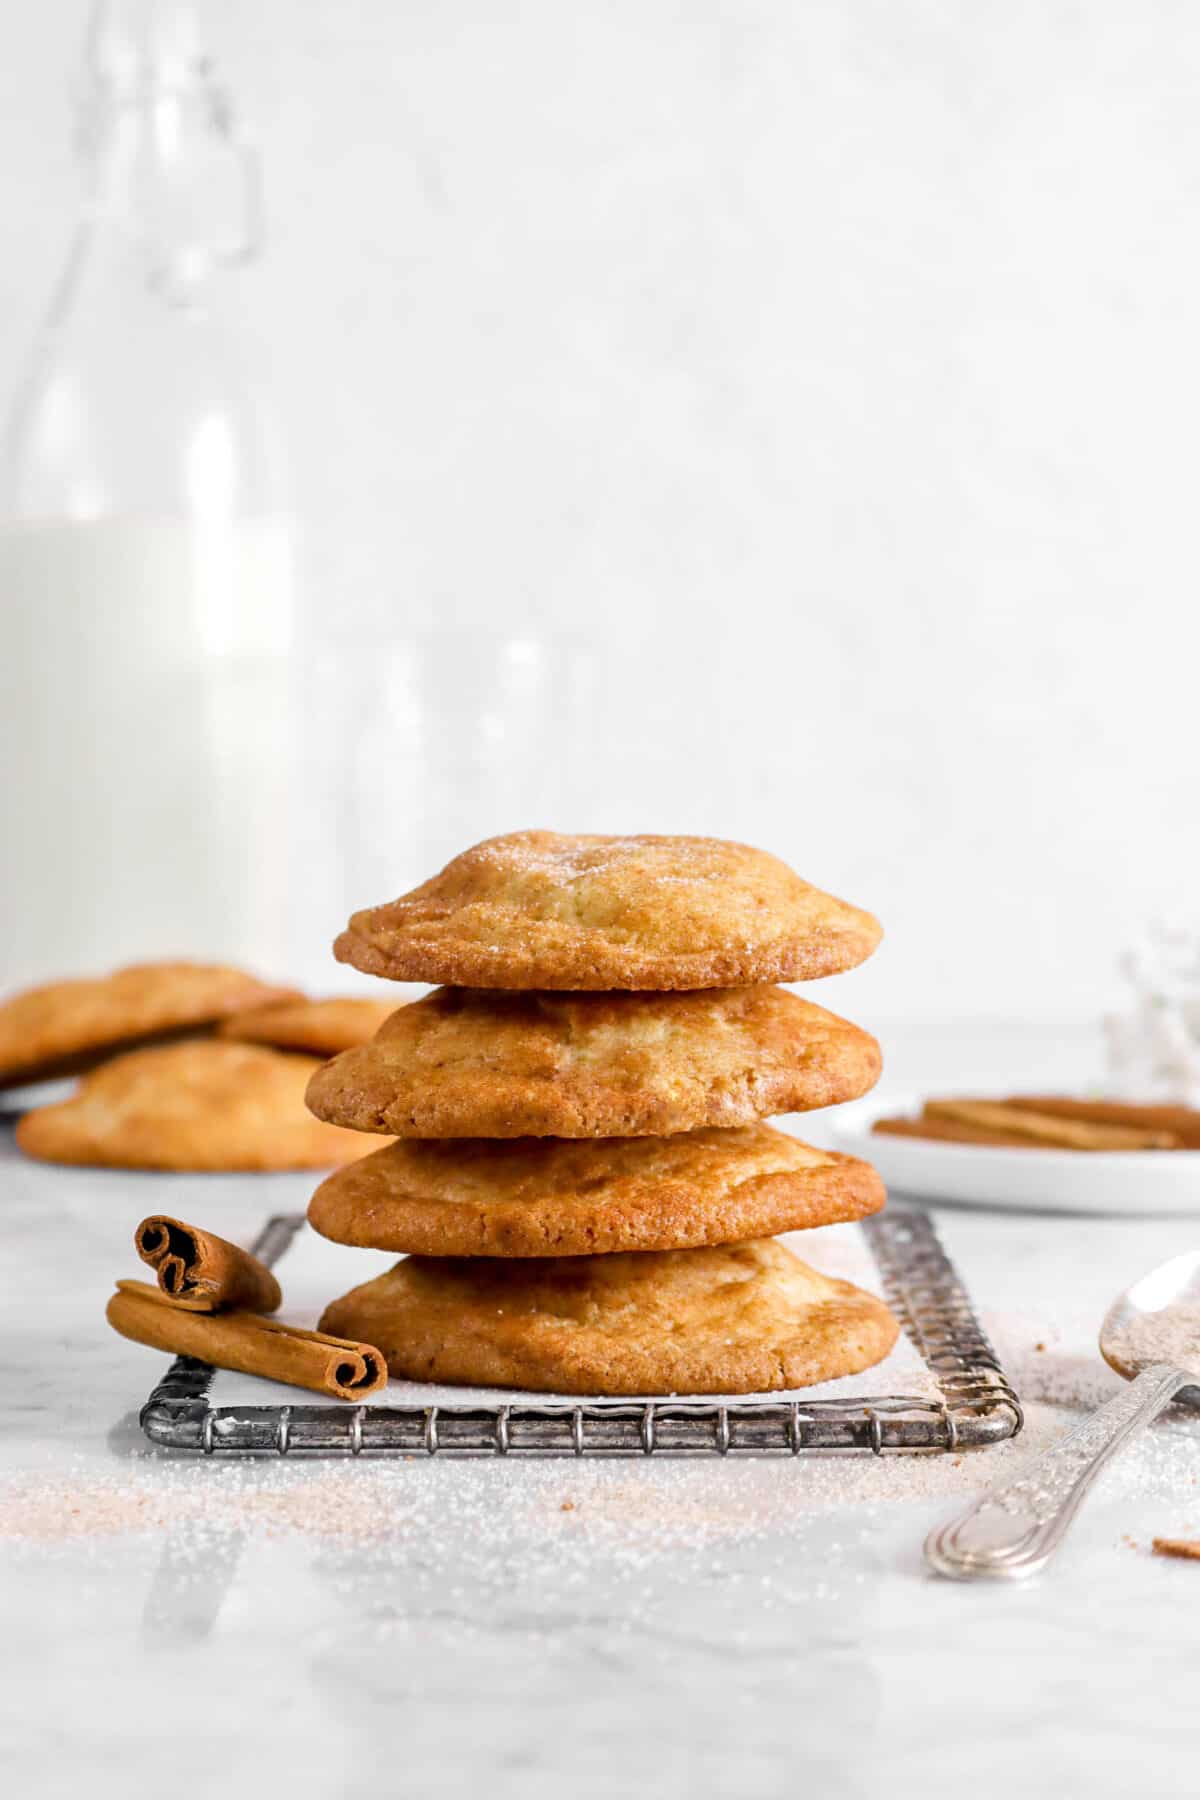 four snickerdoodle cookies stacked on wire cooling rack with two cinnamon sticks, a spoon, more cookies behind, and glass of milk